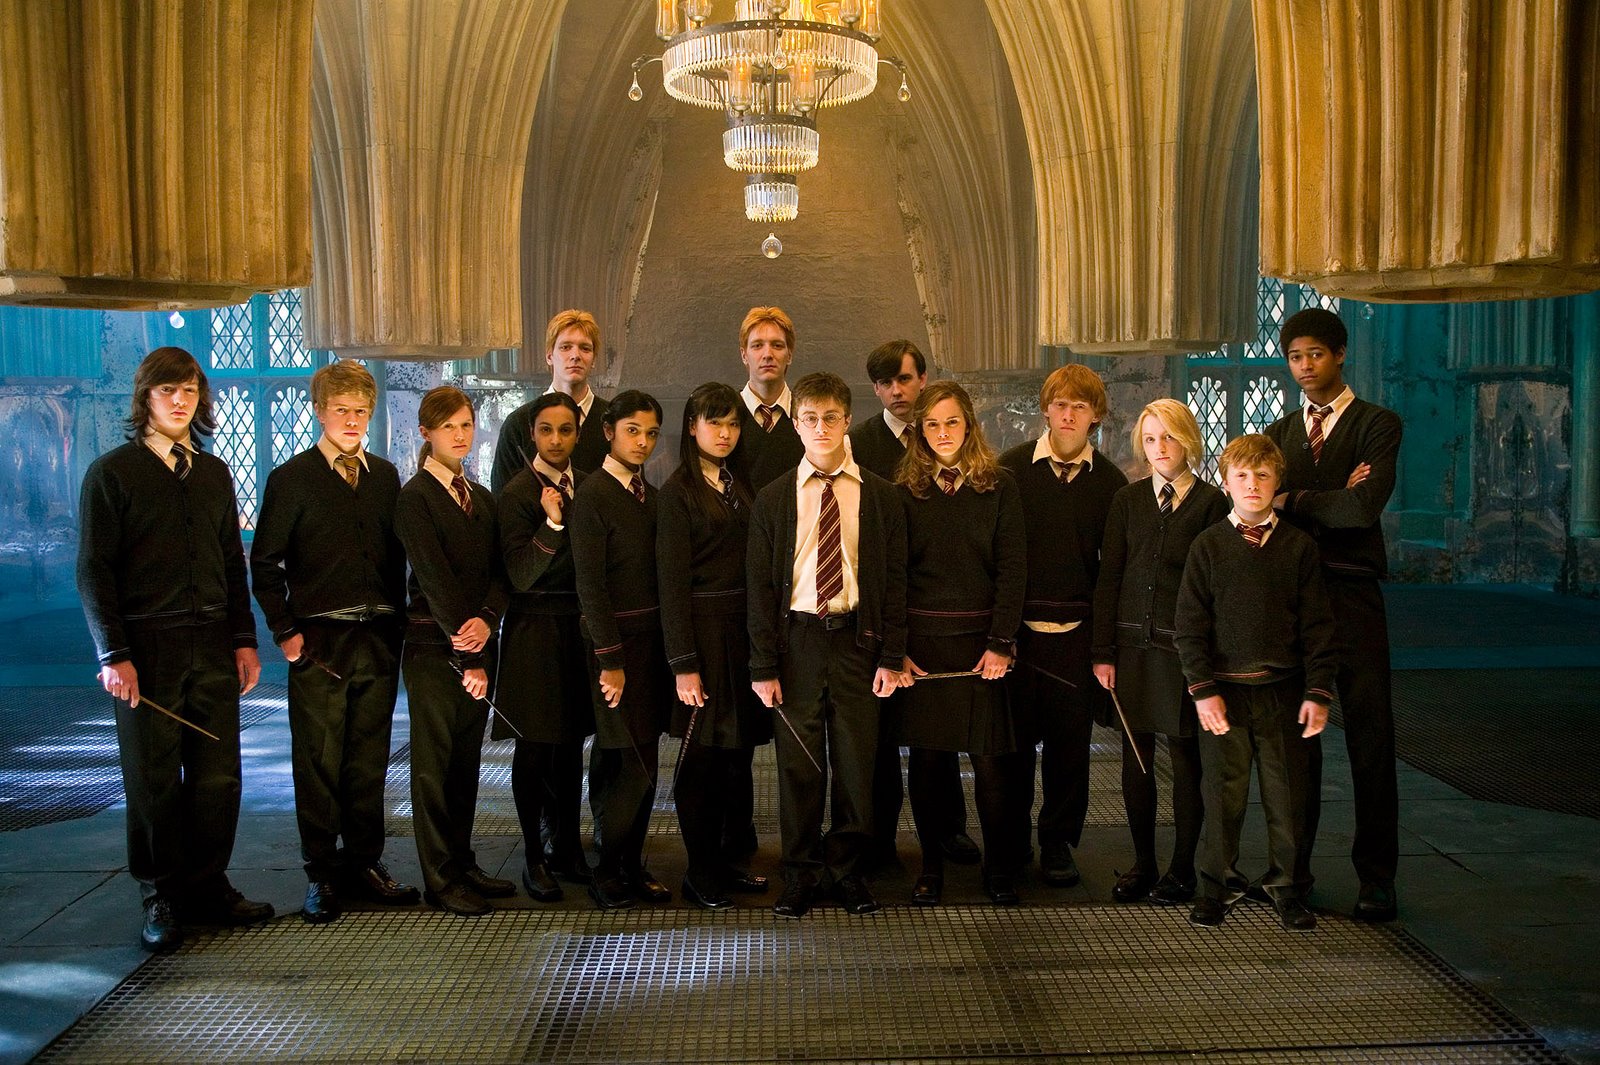 [harry_potter_and_the_order_of_the_phoenix_image__1_.jpg]